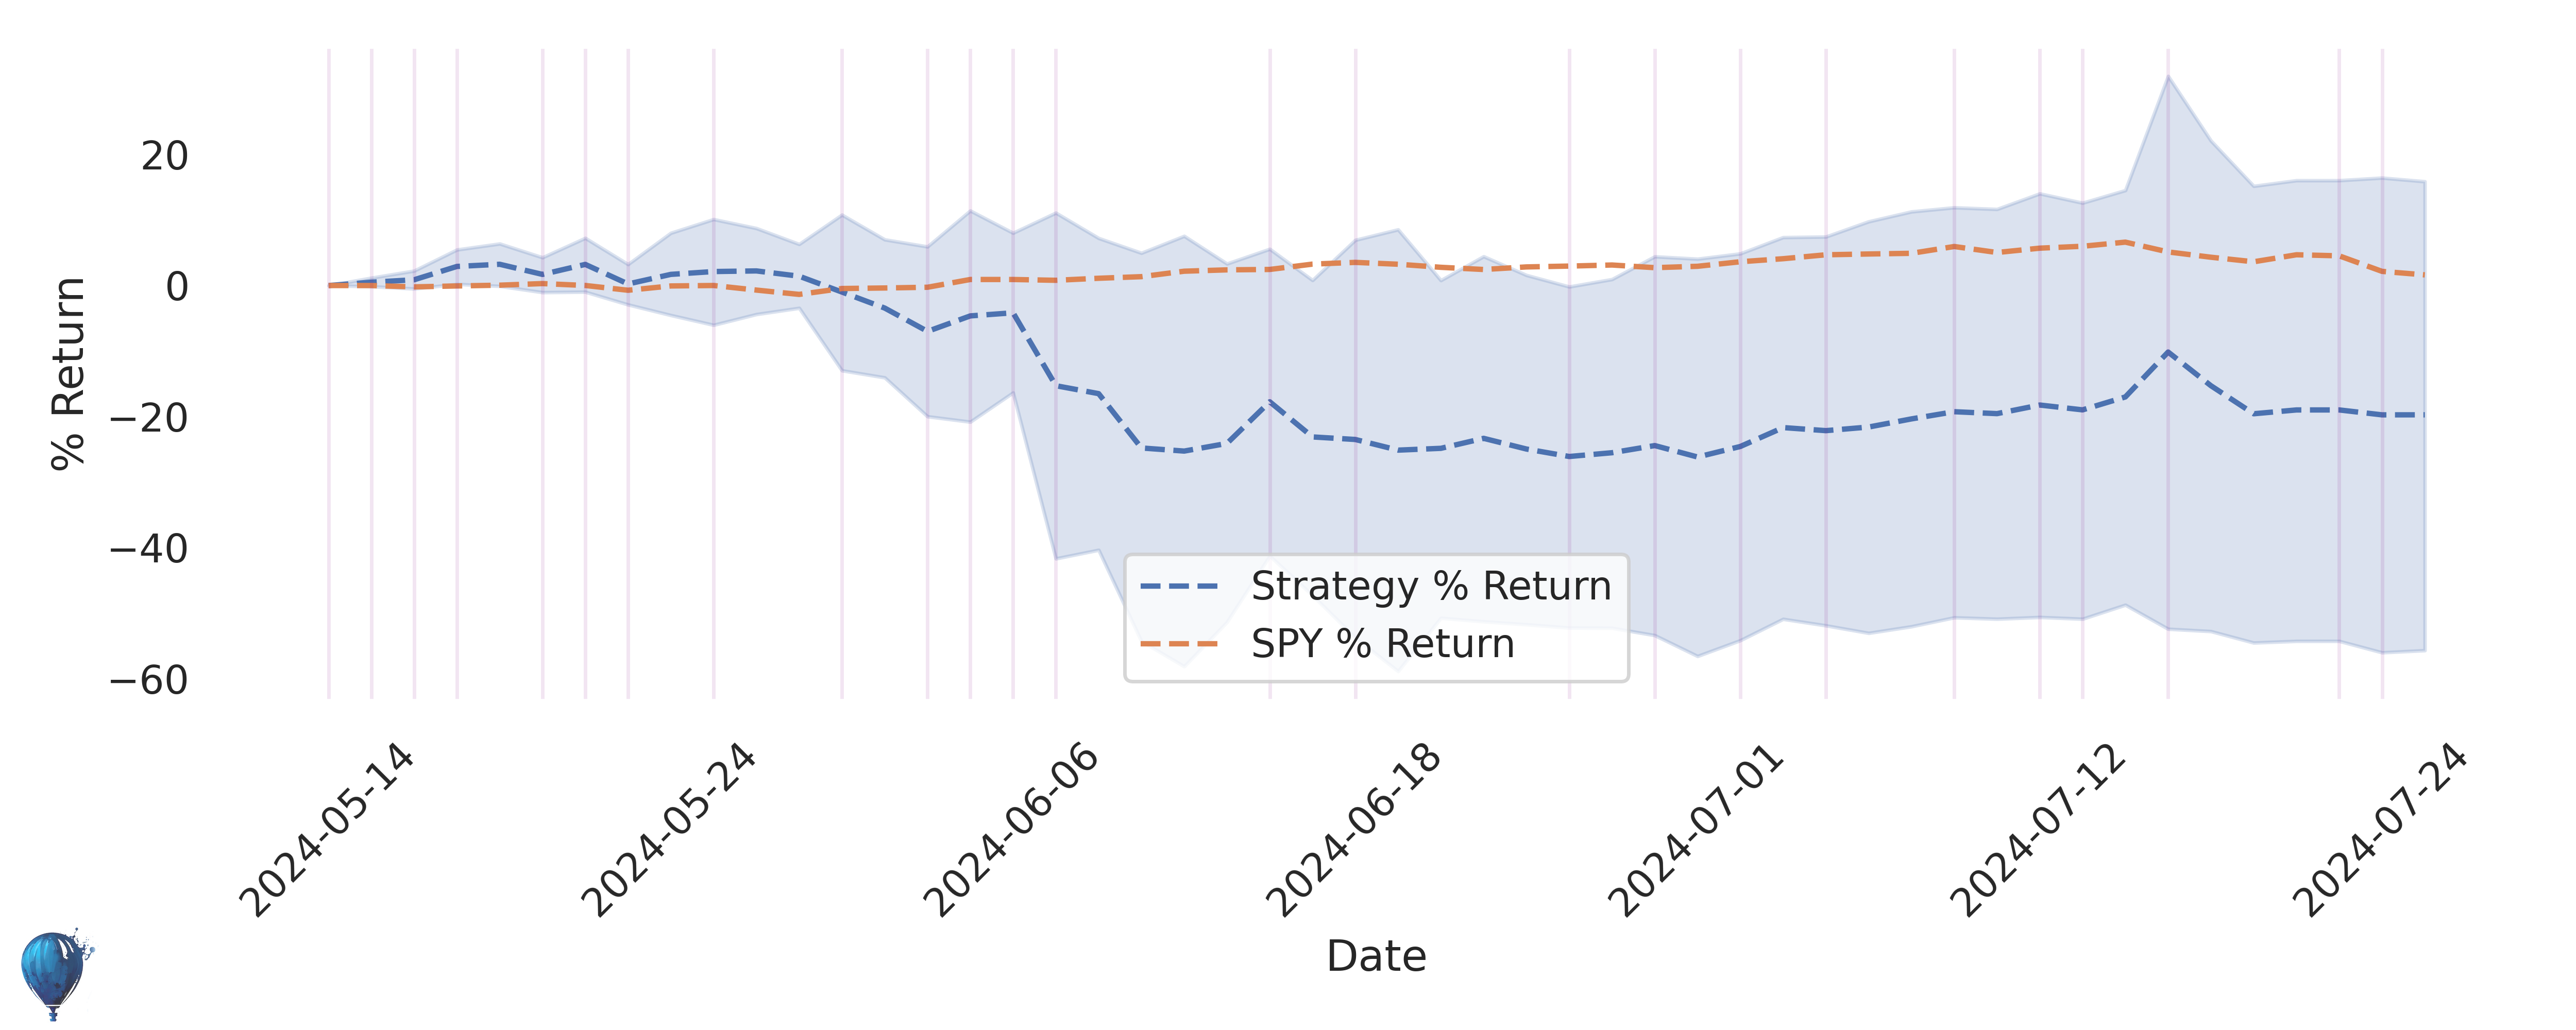 HL trading strategy historical performance